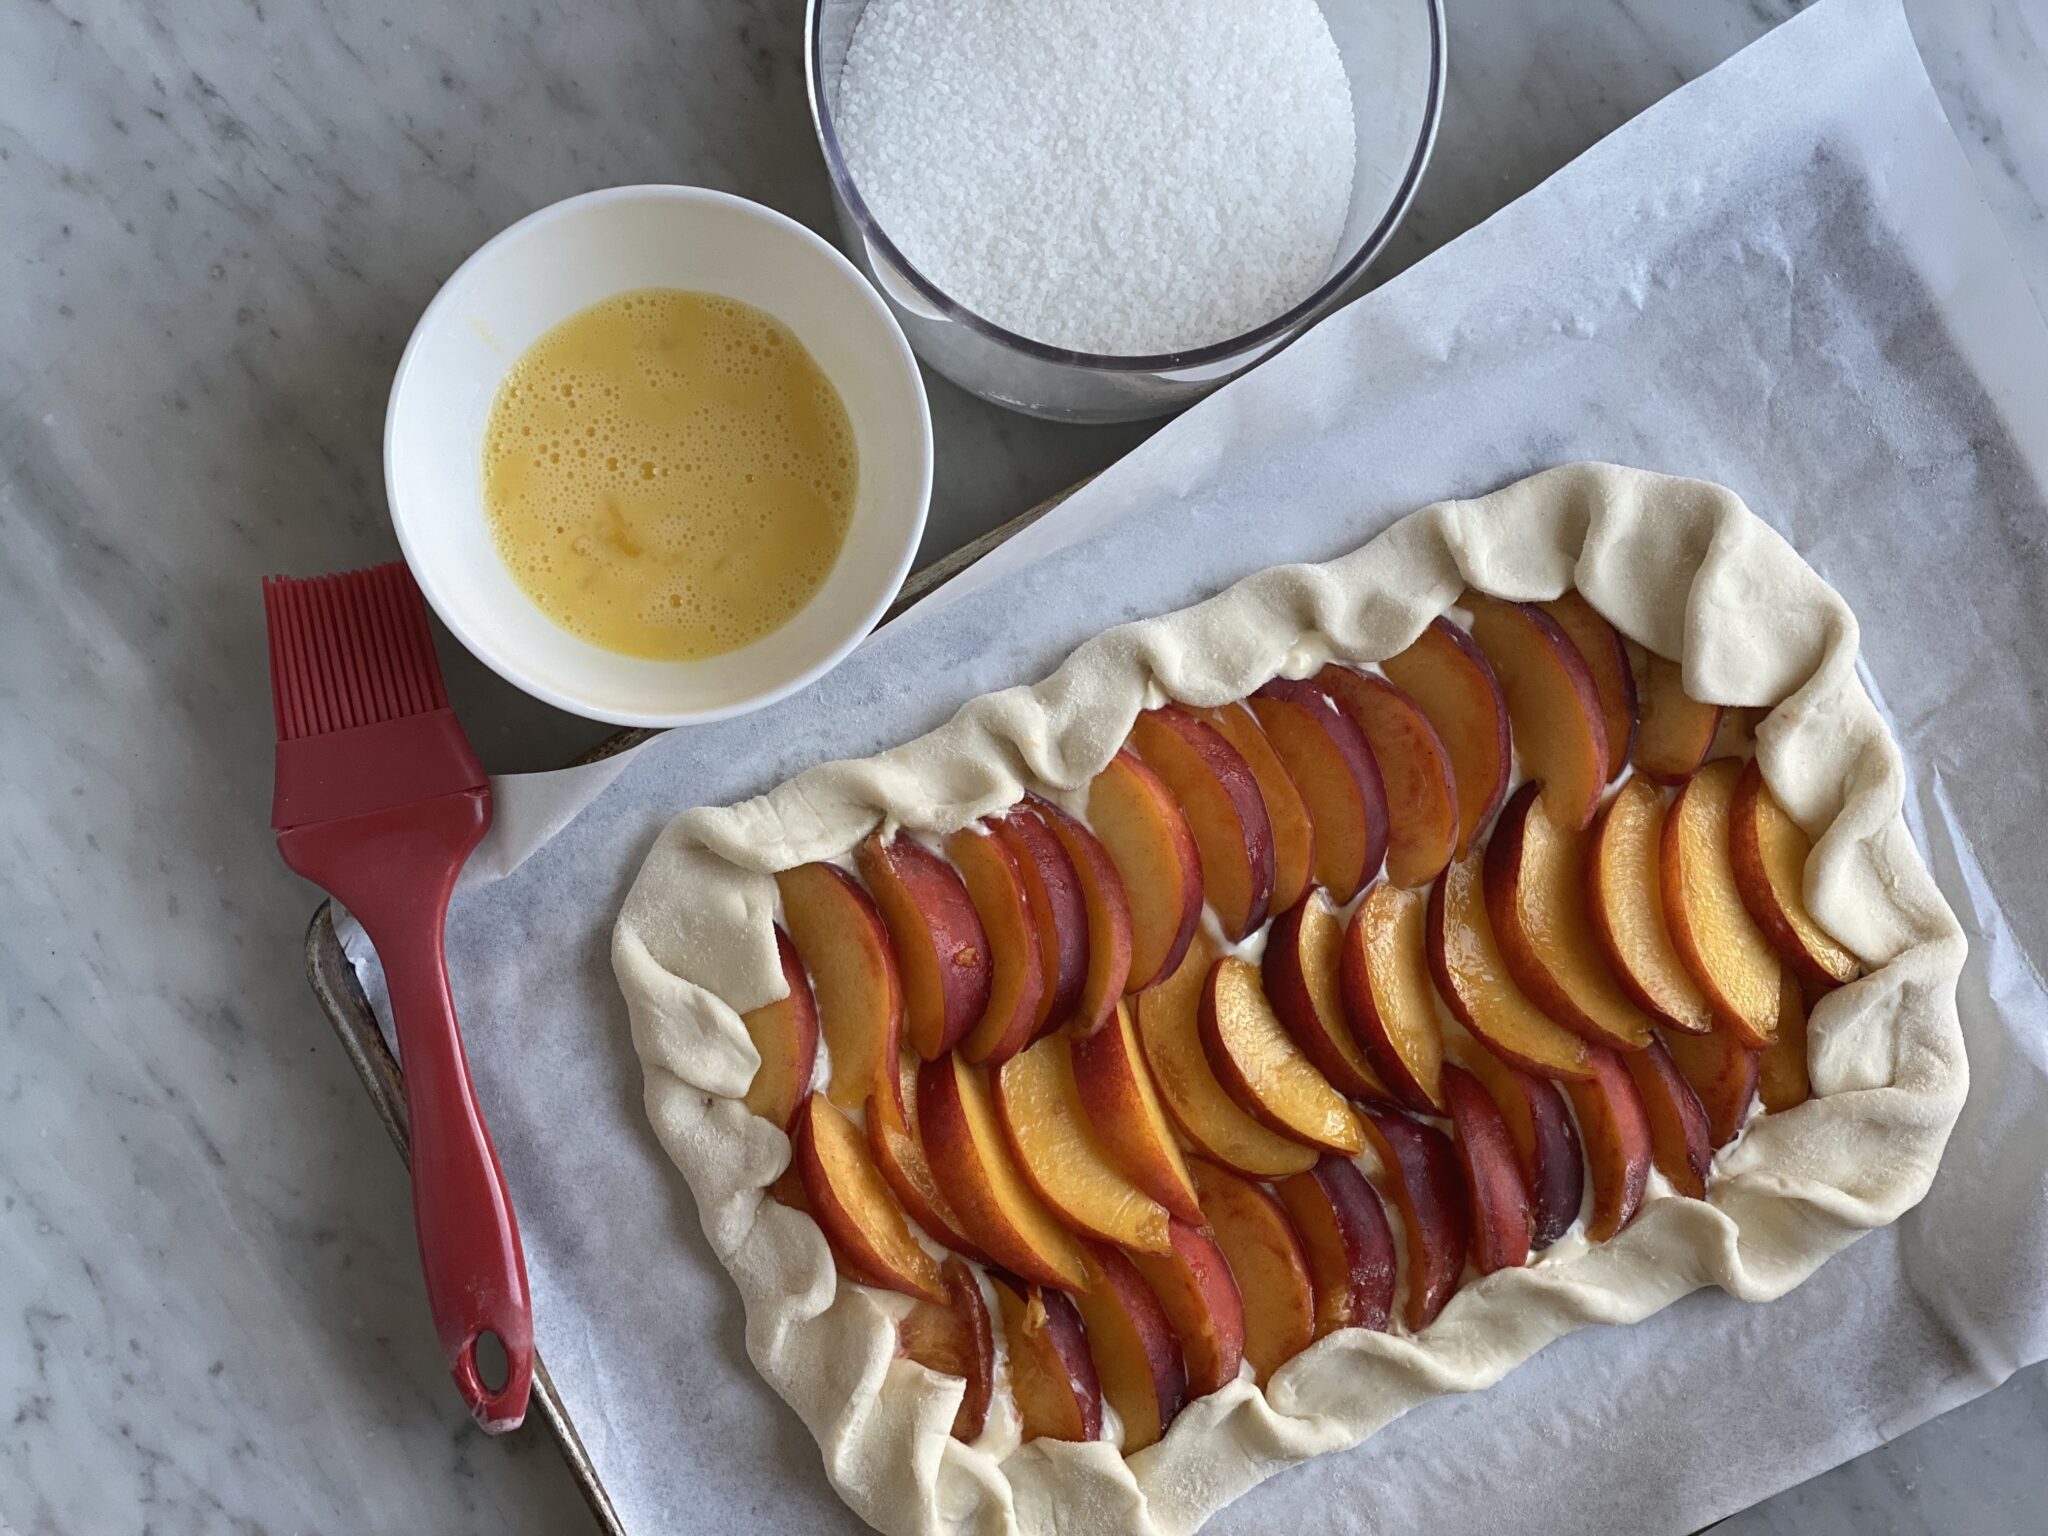 Whisked egg in a bowl, course sugar in a bowl, and peach galette, unbaked